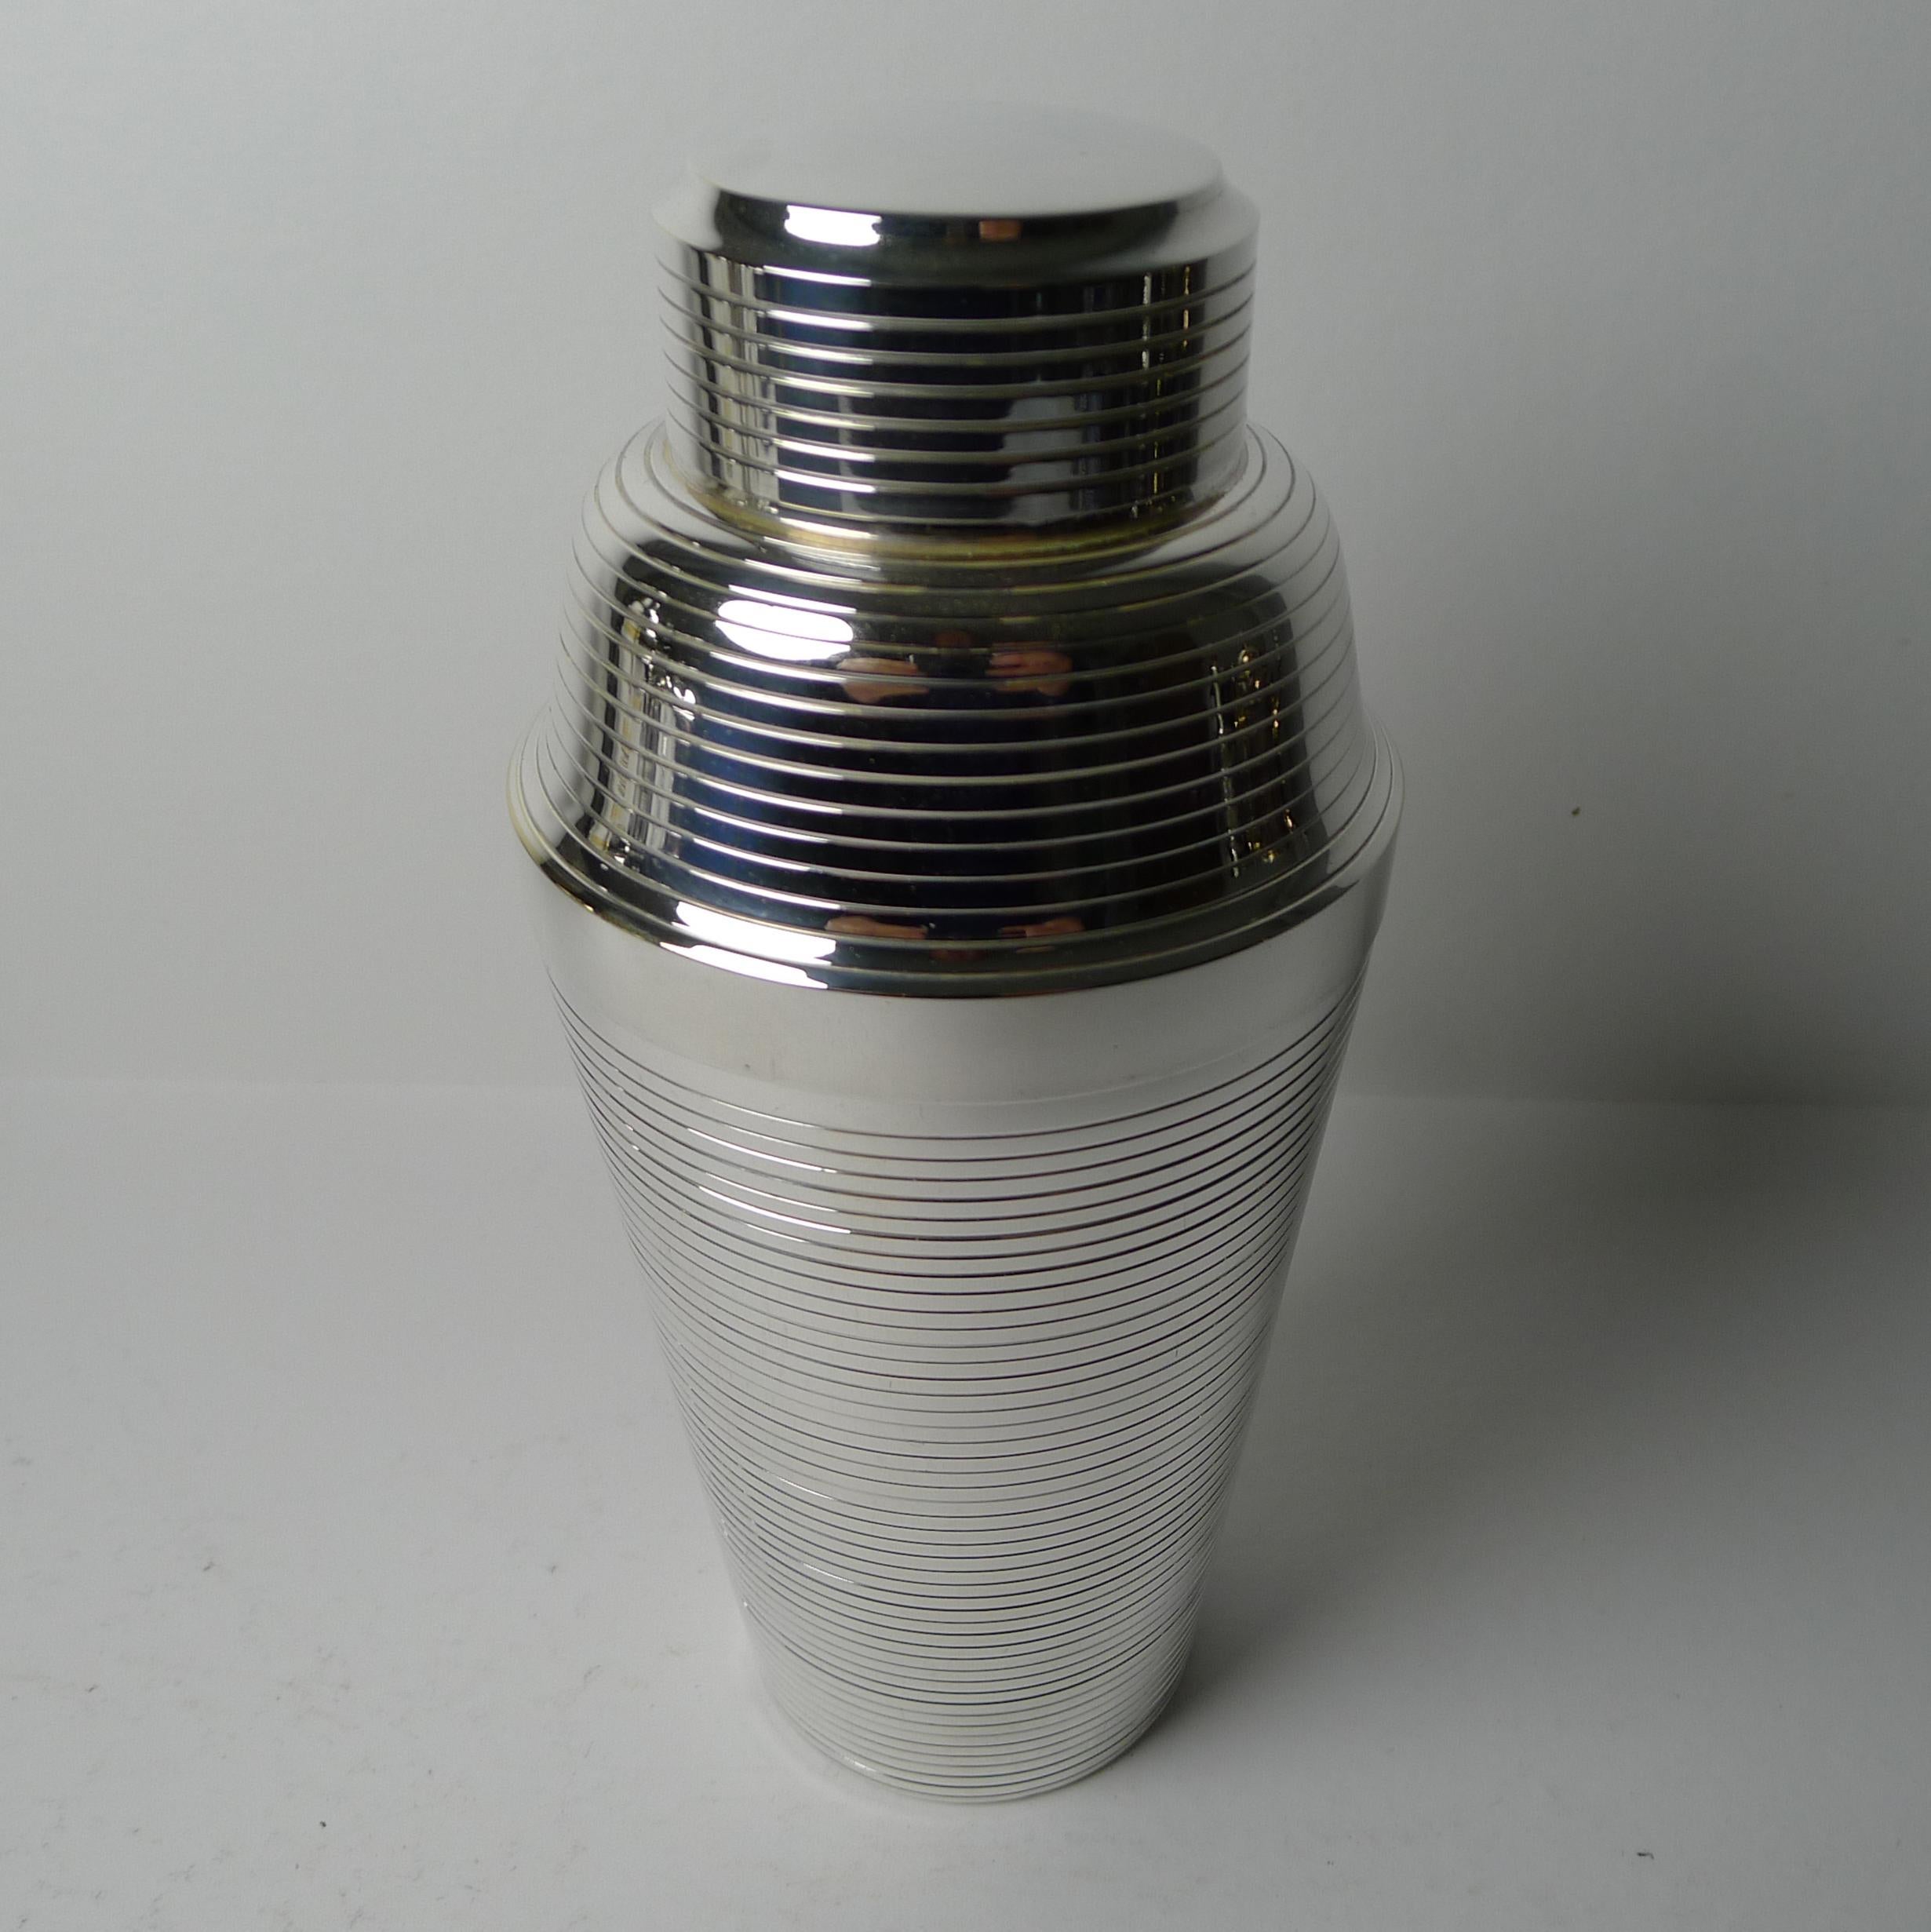 A handsome streamliner cocktail shaker by the well renowned Carl Deffner of Esslingen.

Just back from our silversmith's workshop where it has been professionally cleaned and polished, restoring it to it's former glory minor interior wear